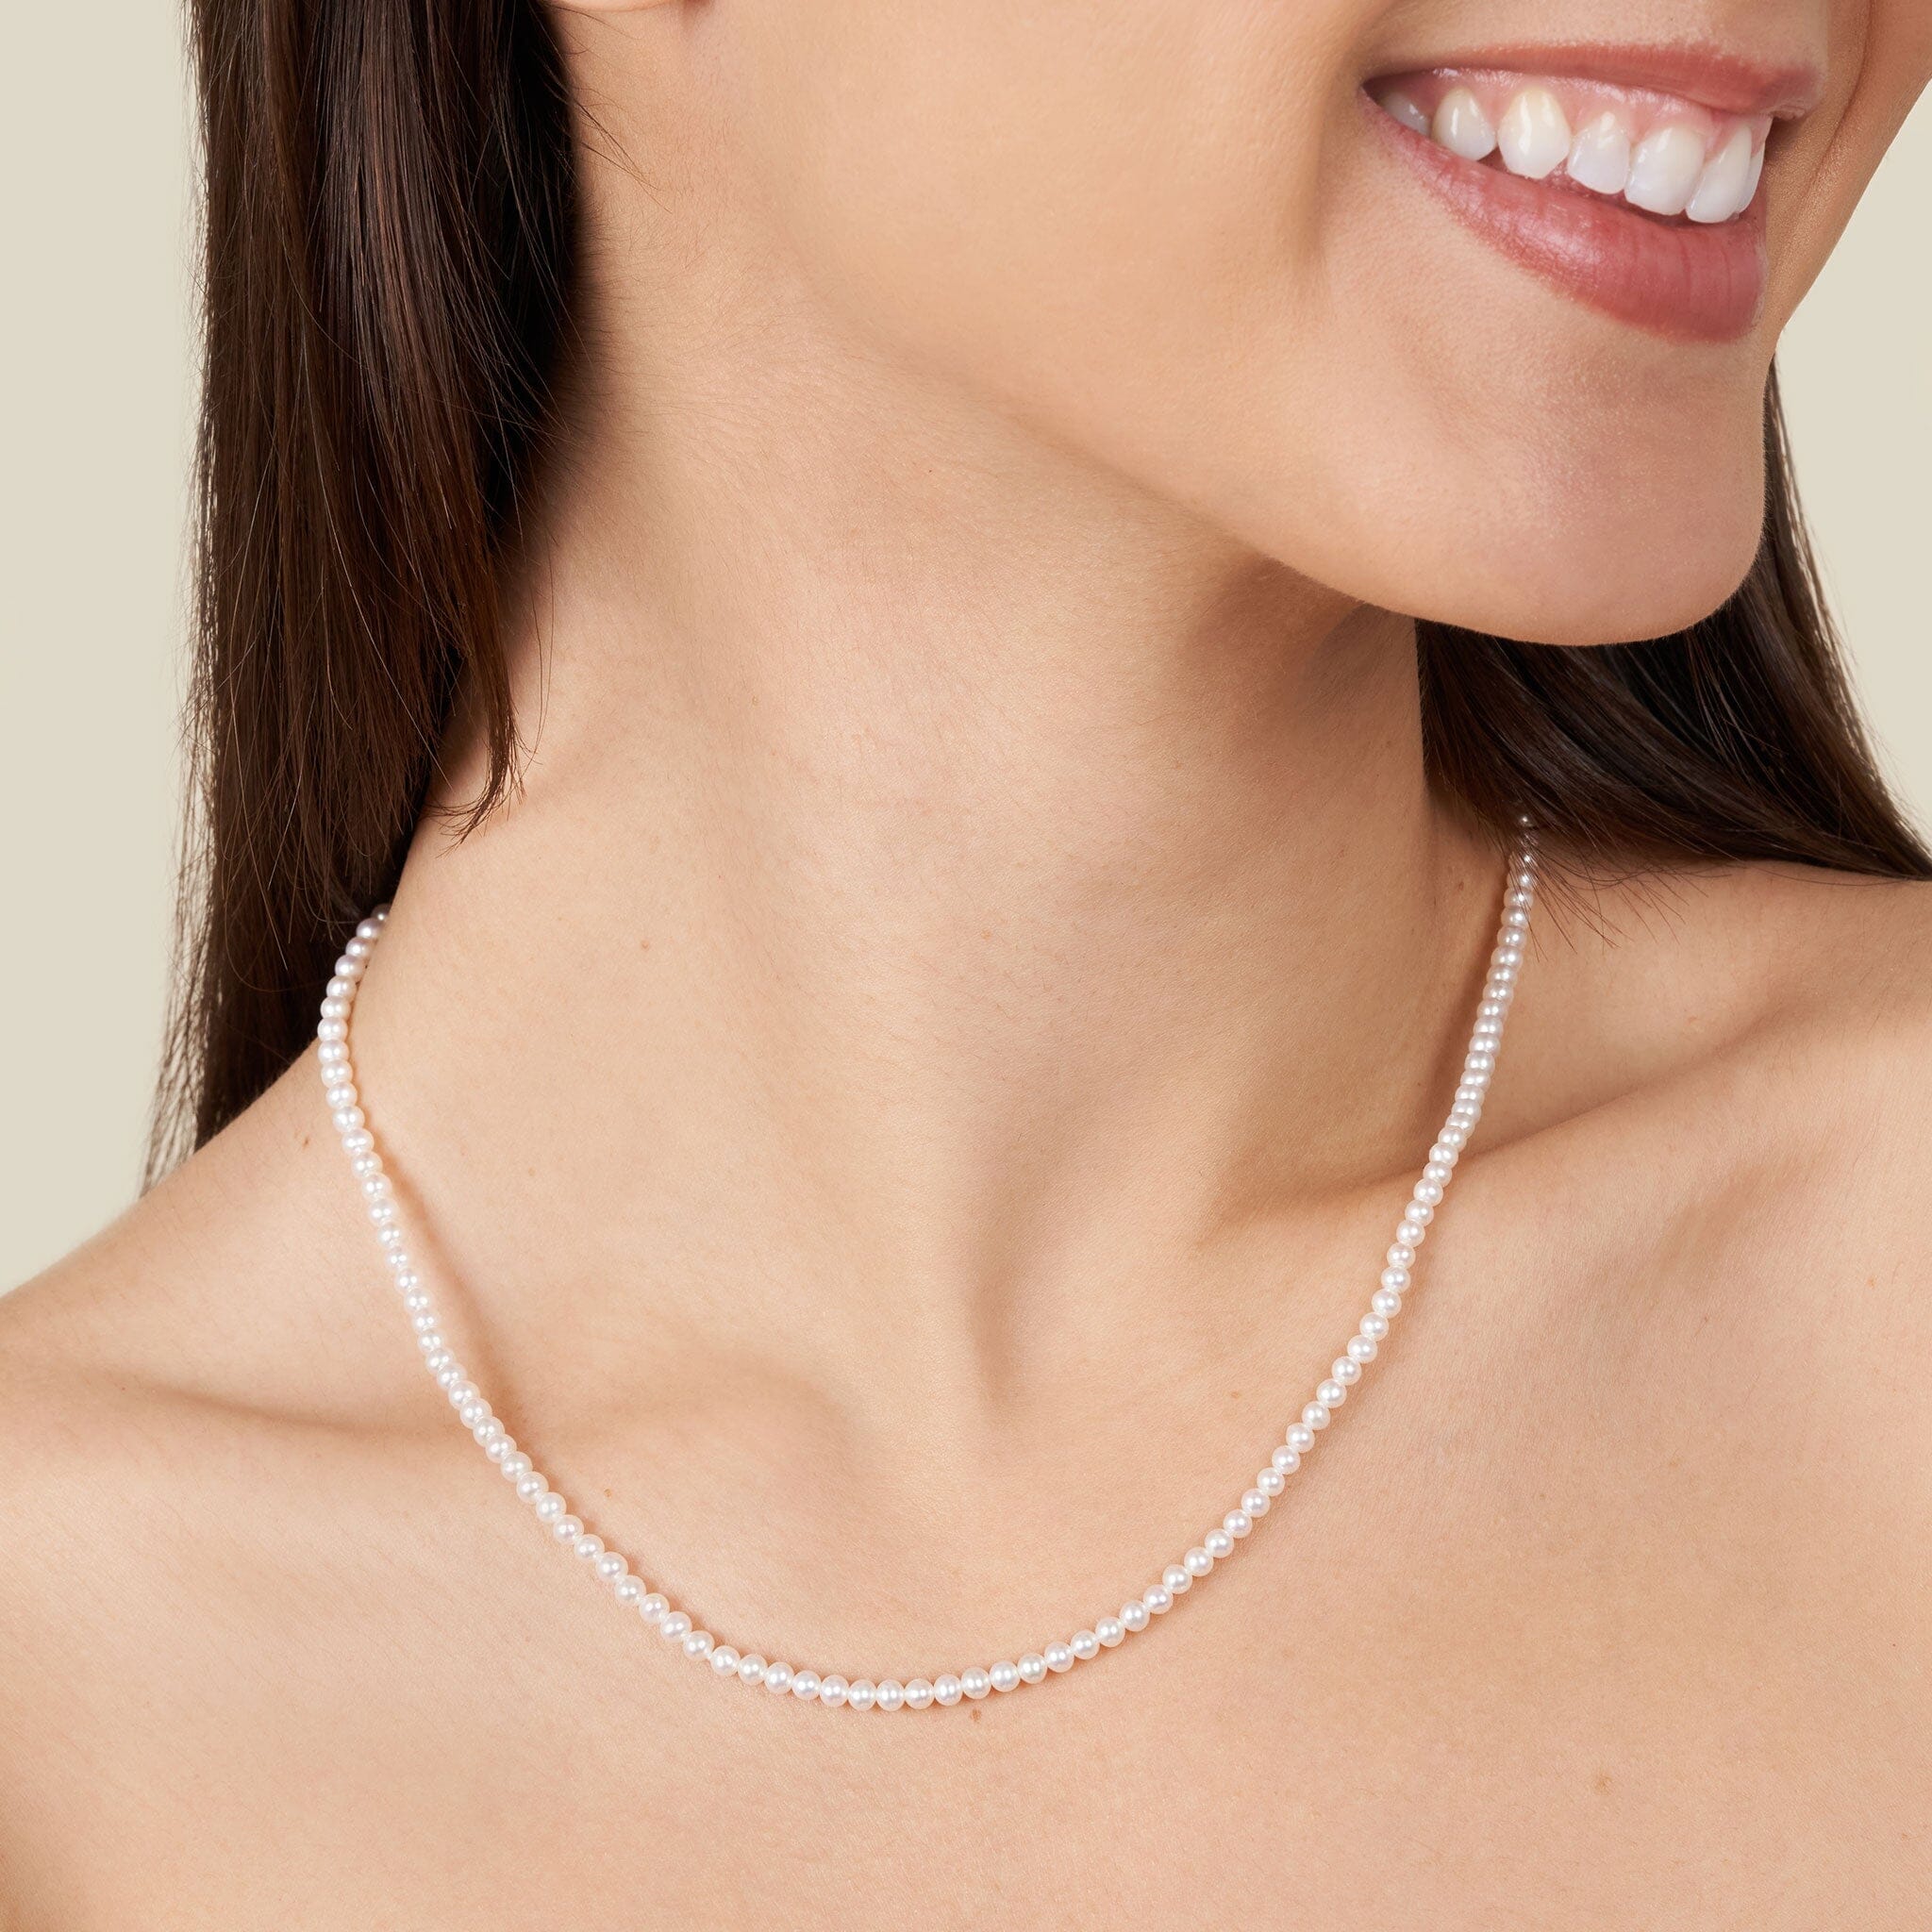 3.0-3.5 mm AAA Freshwater Pearl Necklace - 18 Inch on model